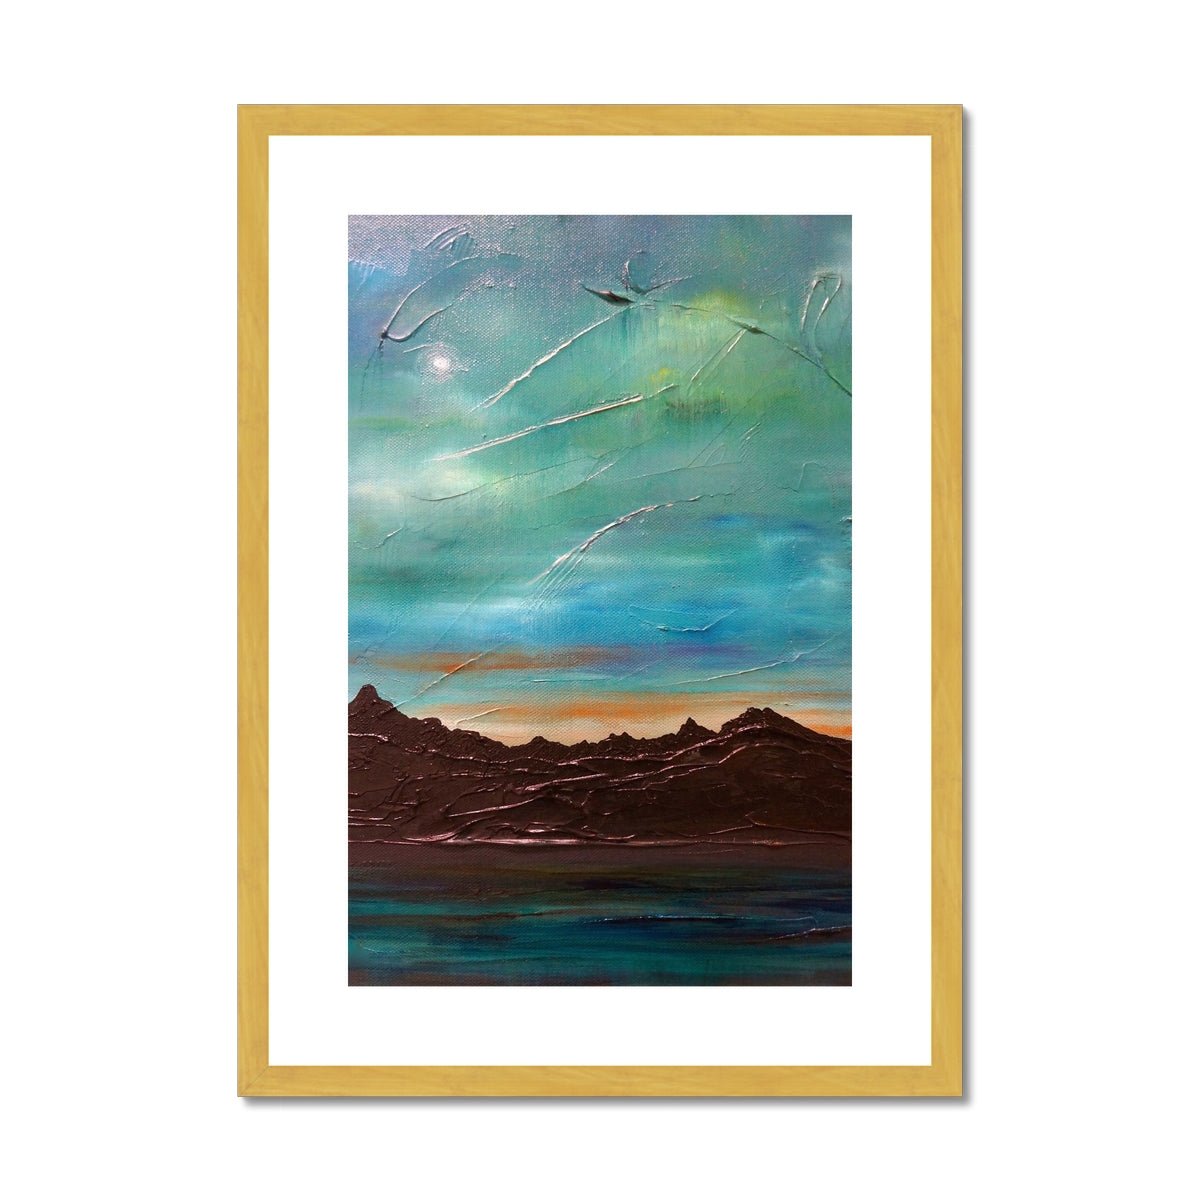 The Cuillin From Elgol Skye Painting | Antique Framed & Mounted Prints From Scotland-Antique Framed & Mounted Prints-Skye Art Gallery-A2 Portrait-Gold Frame-Paintings, Prints, Homeware, Art Gifts From Scotland By Scottish Artist Kevin Hunter